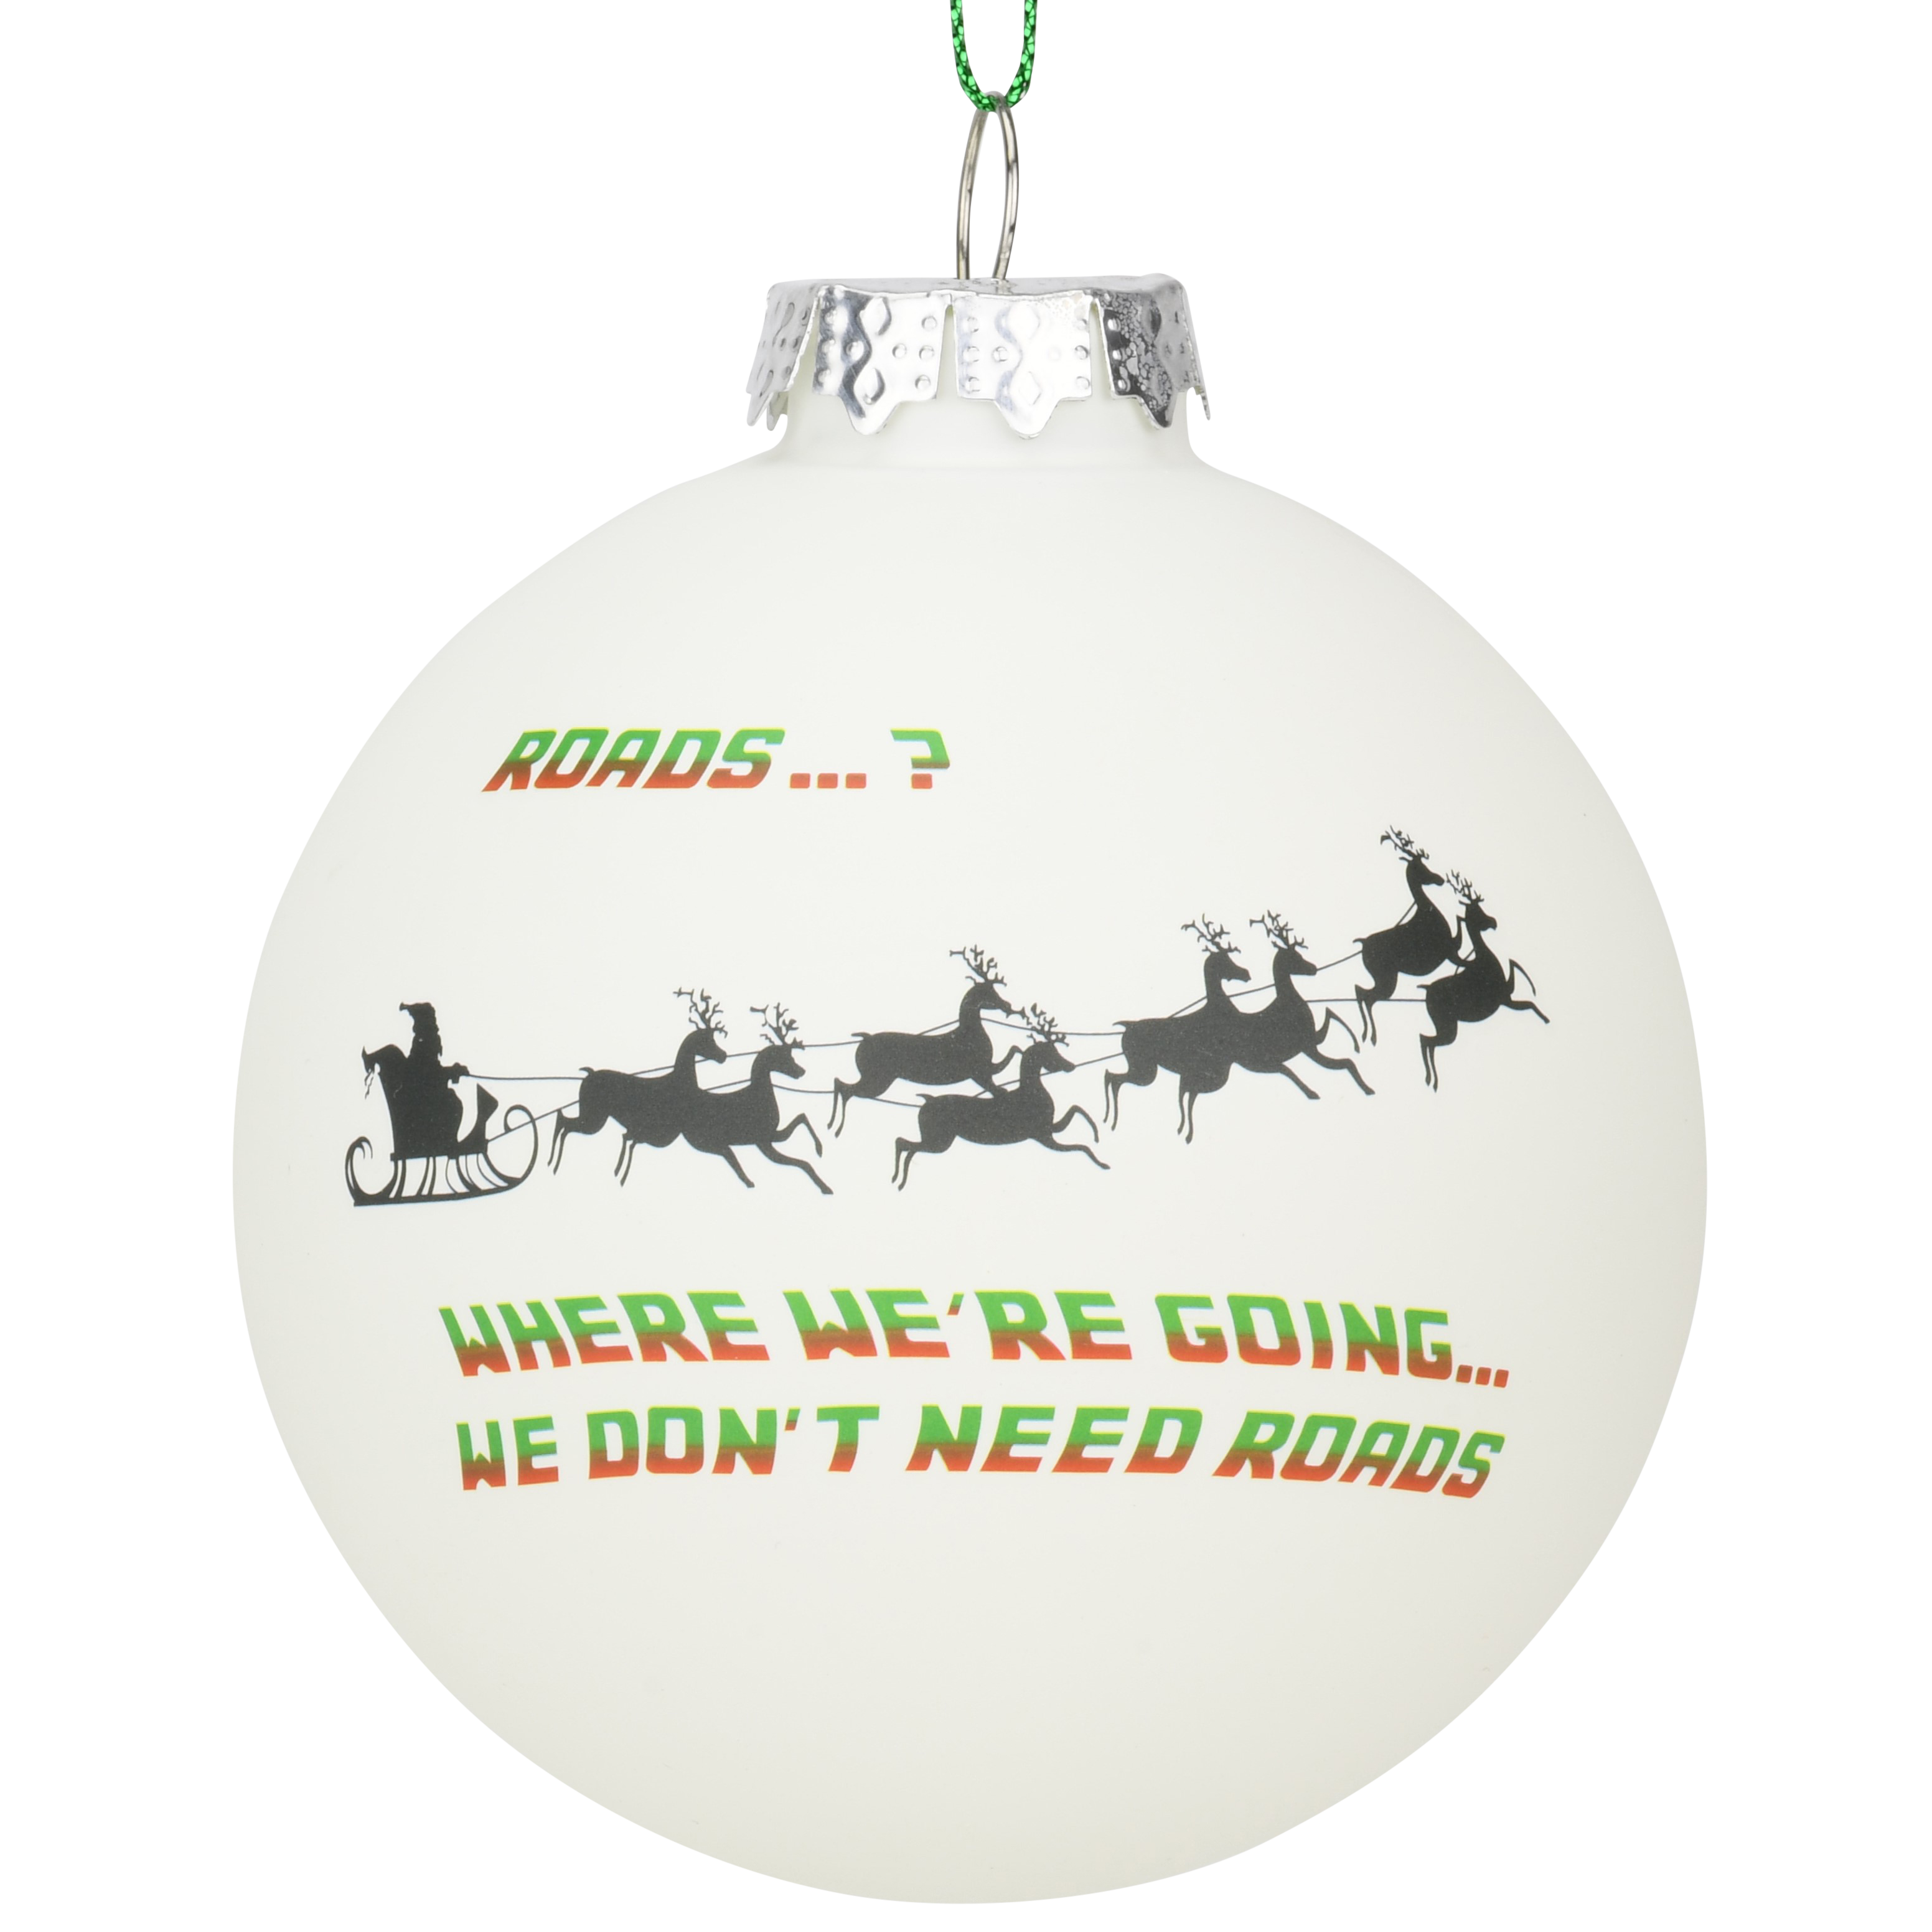 Back to Christmas - Where We're Going. We Don't Need Roads Glass Christmas Ornaments